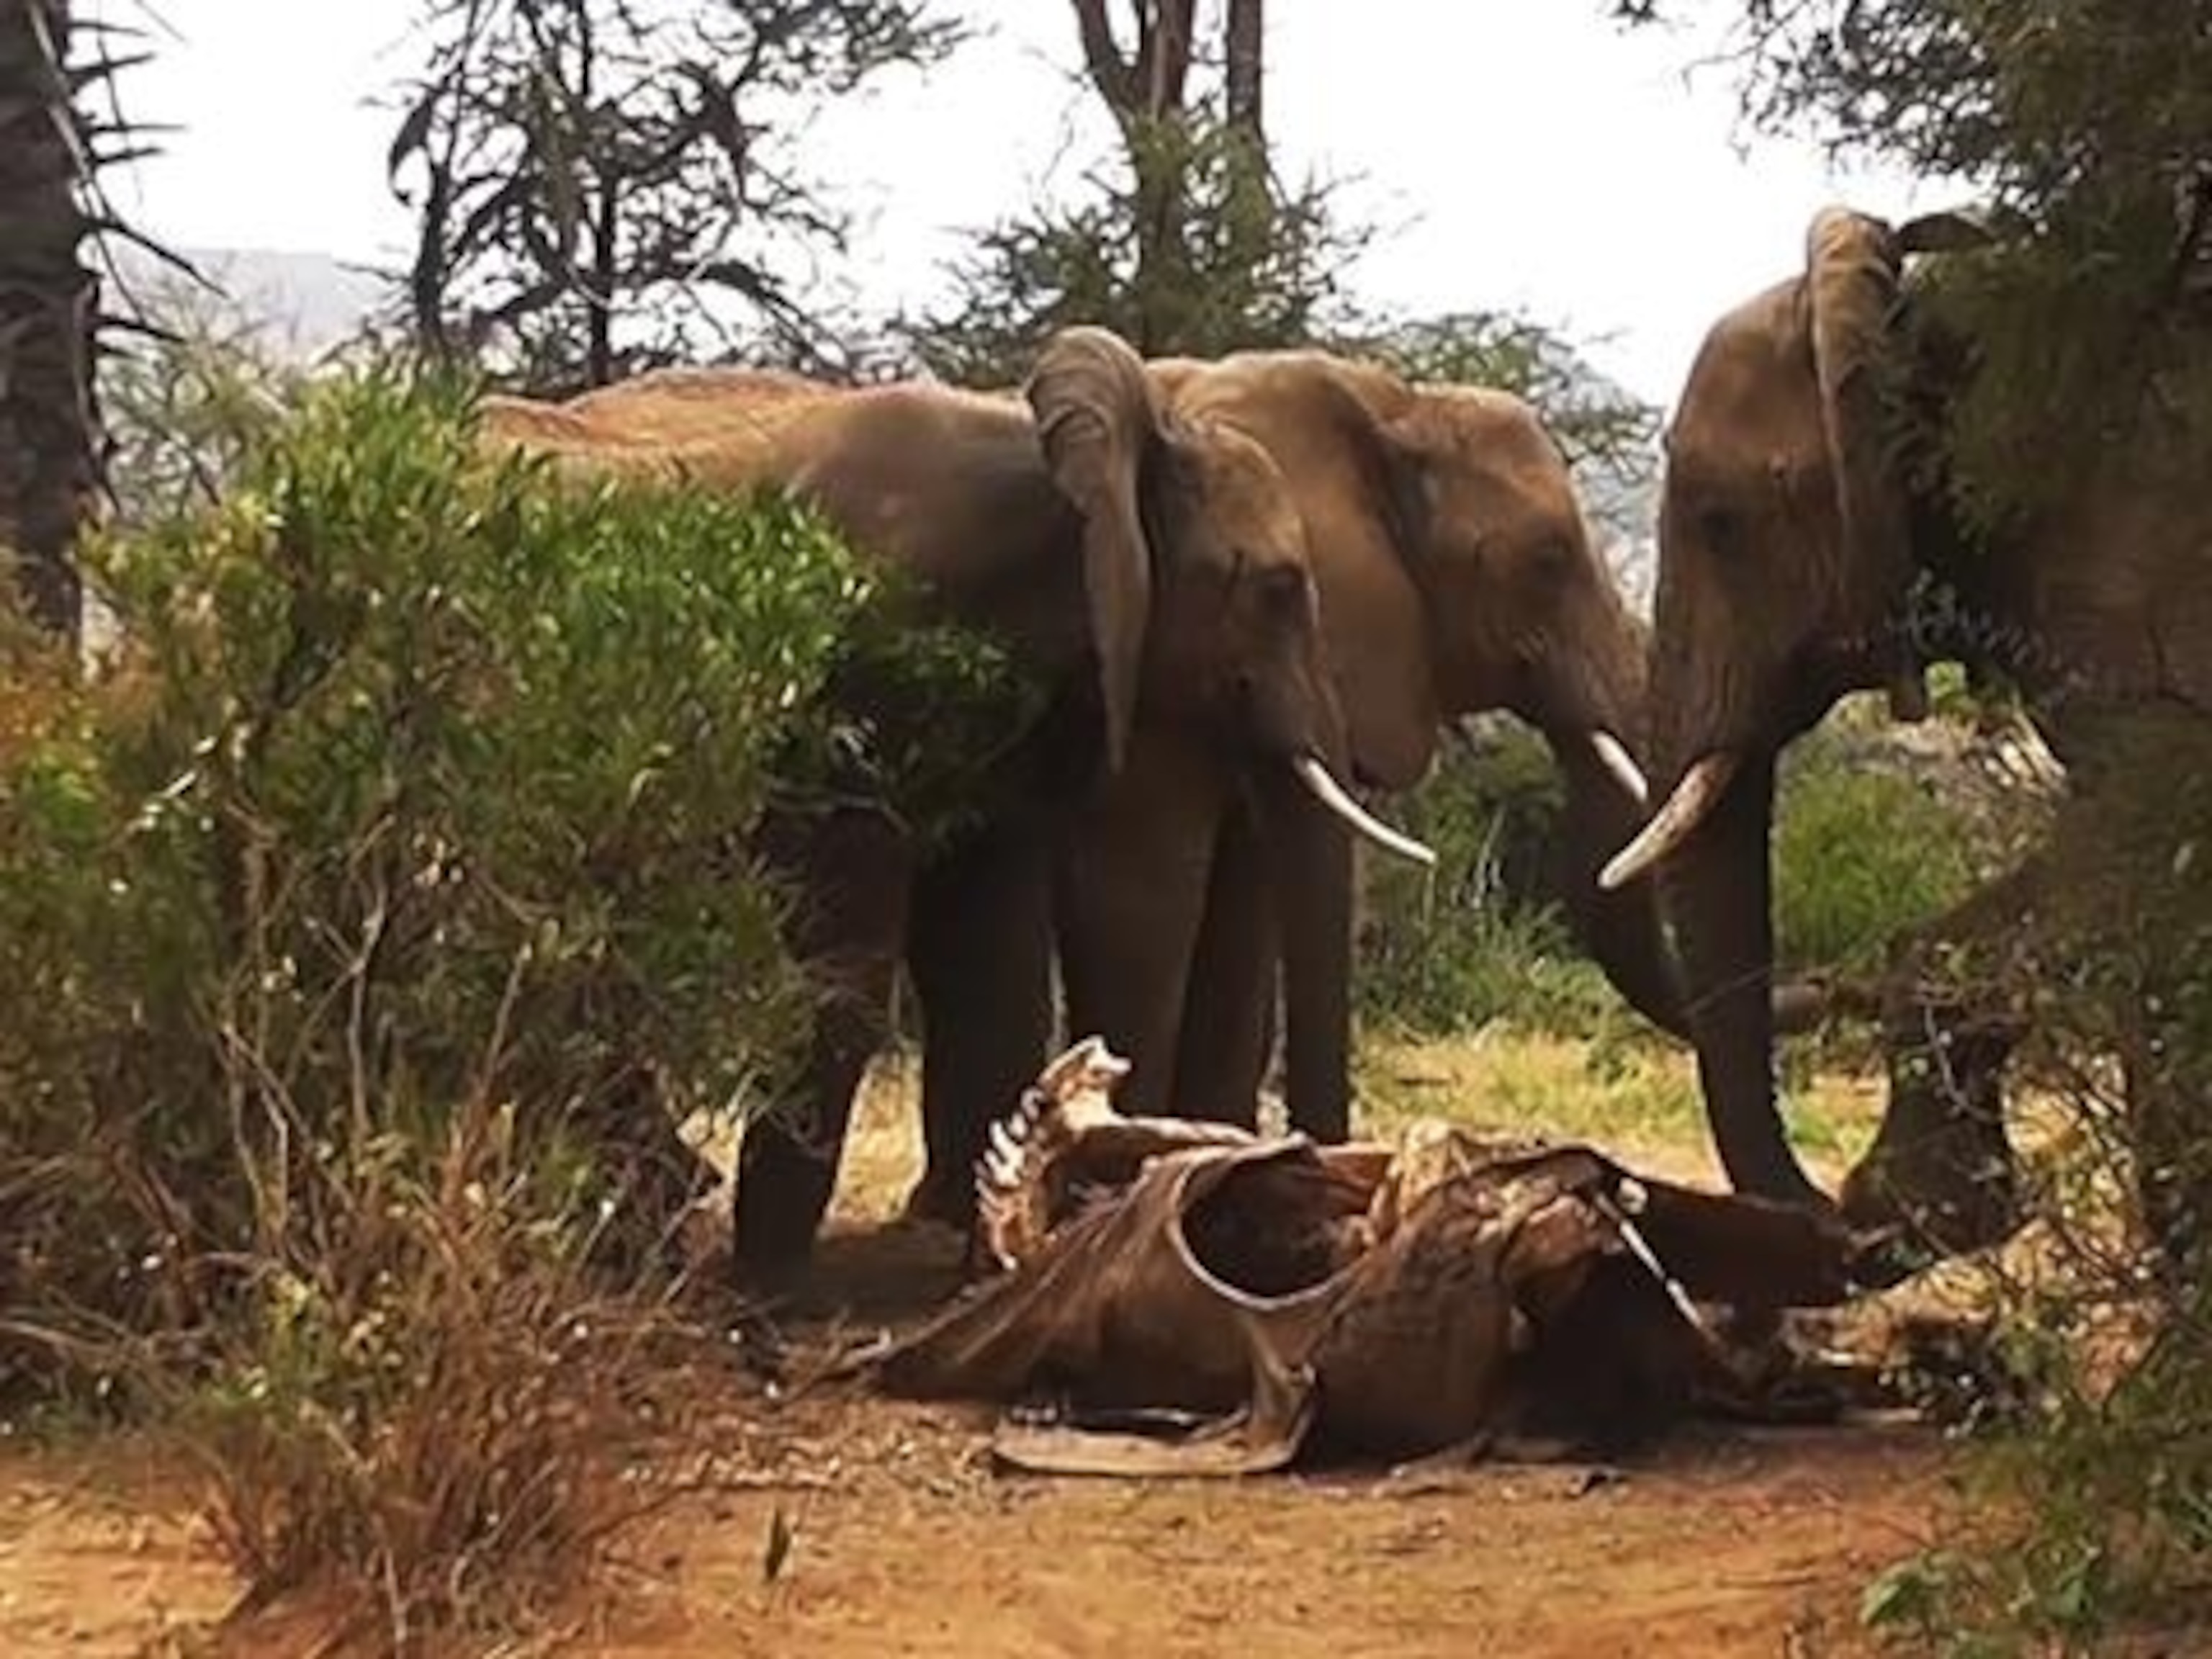 What do elephants do when one of the herd dies?